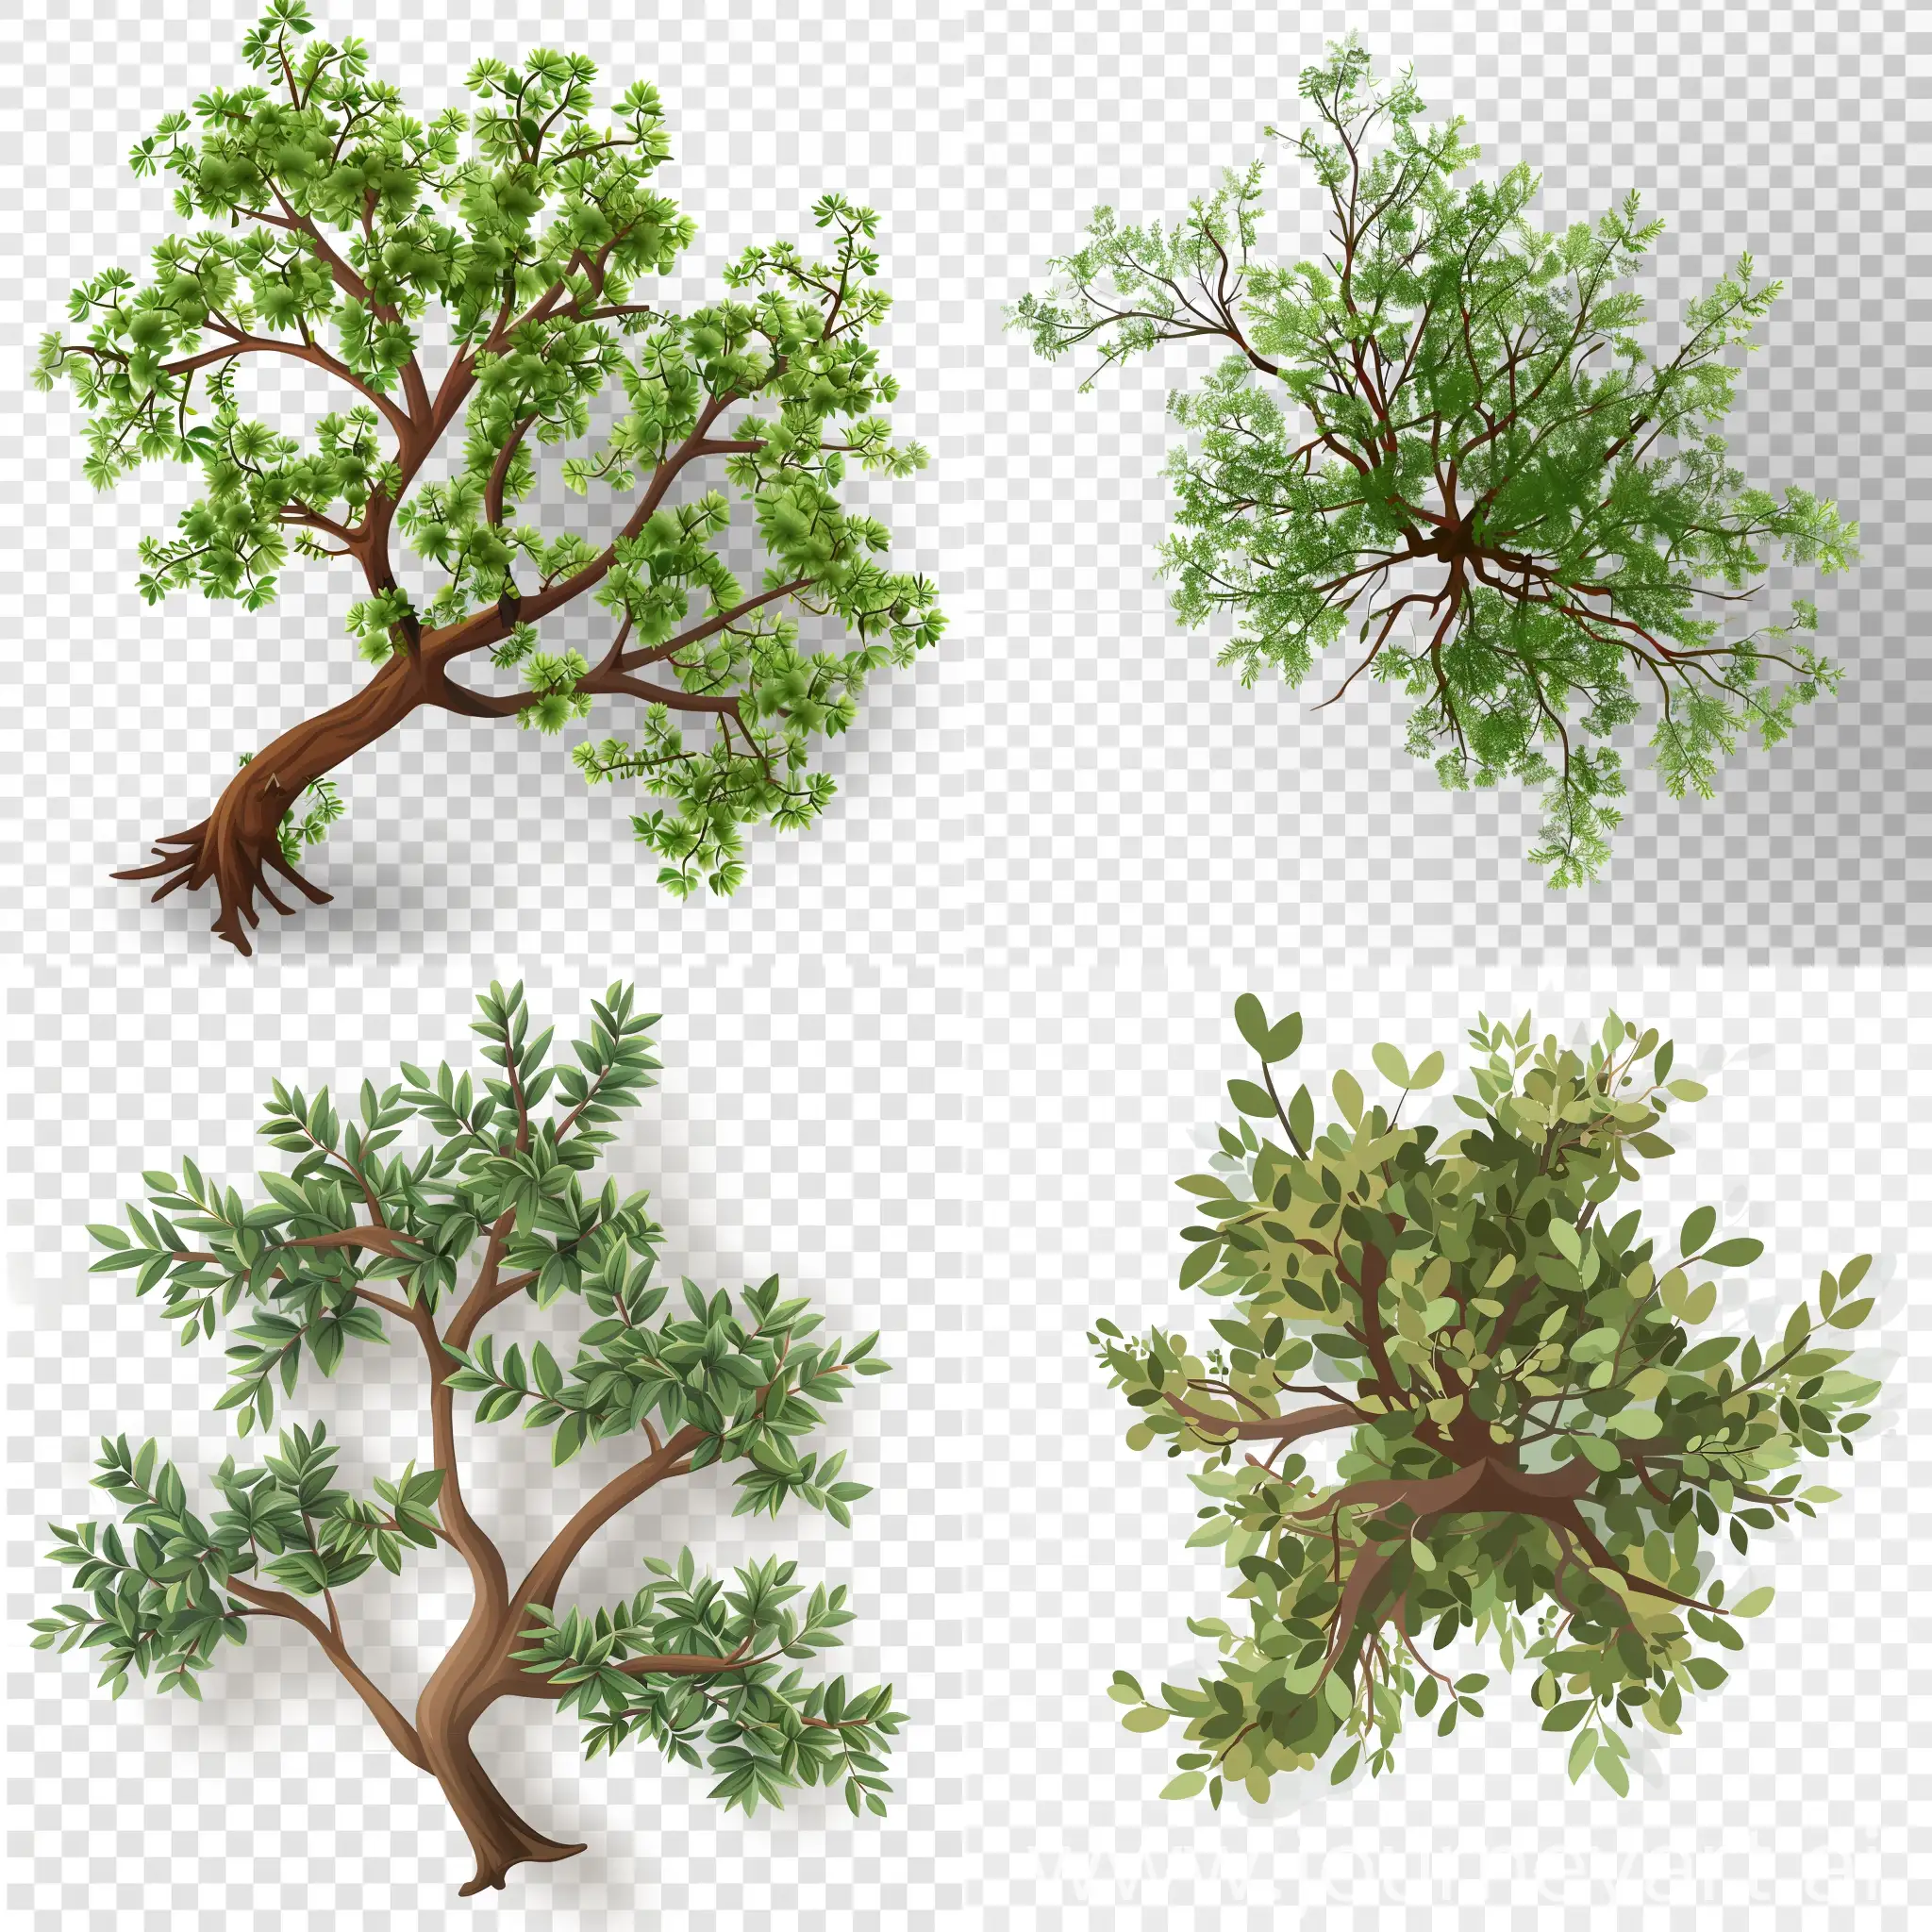 Cartoon-Acacia-Tree-with-Delicate-Green-Leaves-on-Transparent-Background